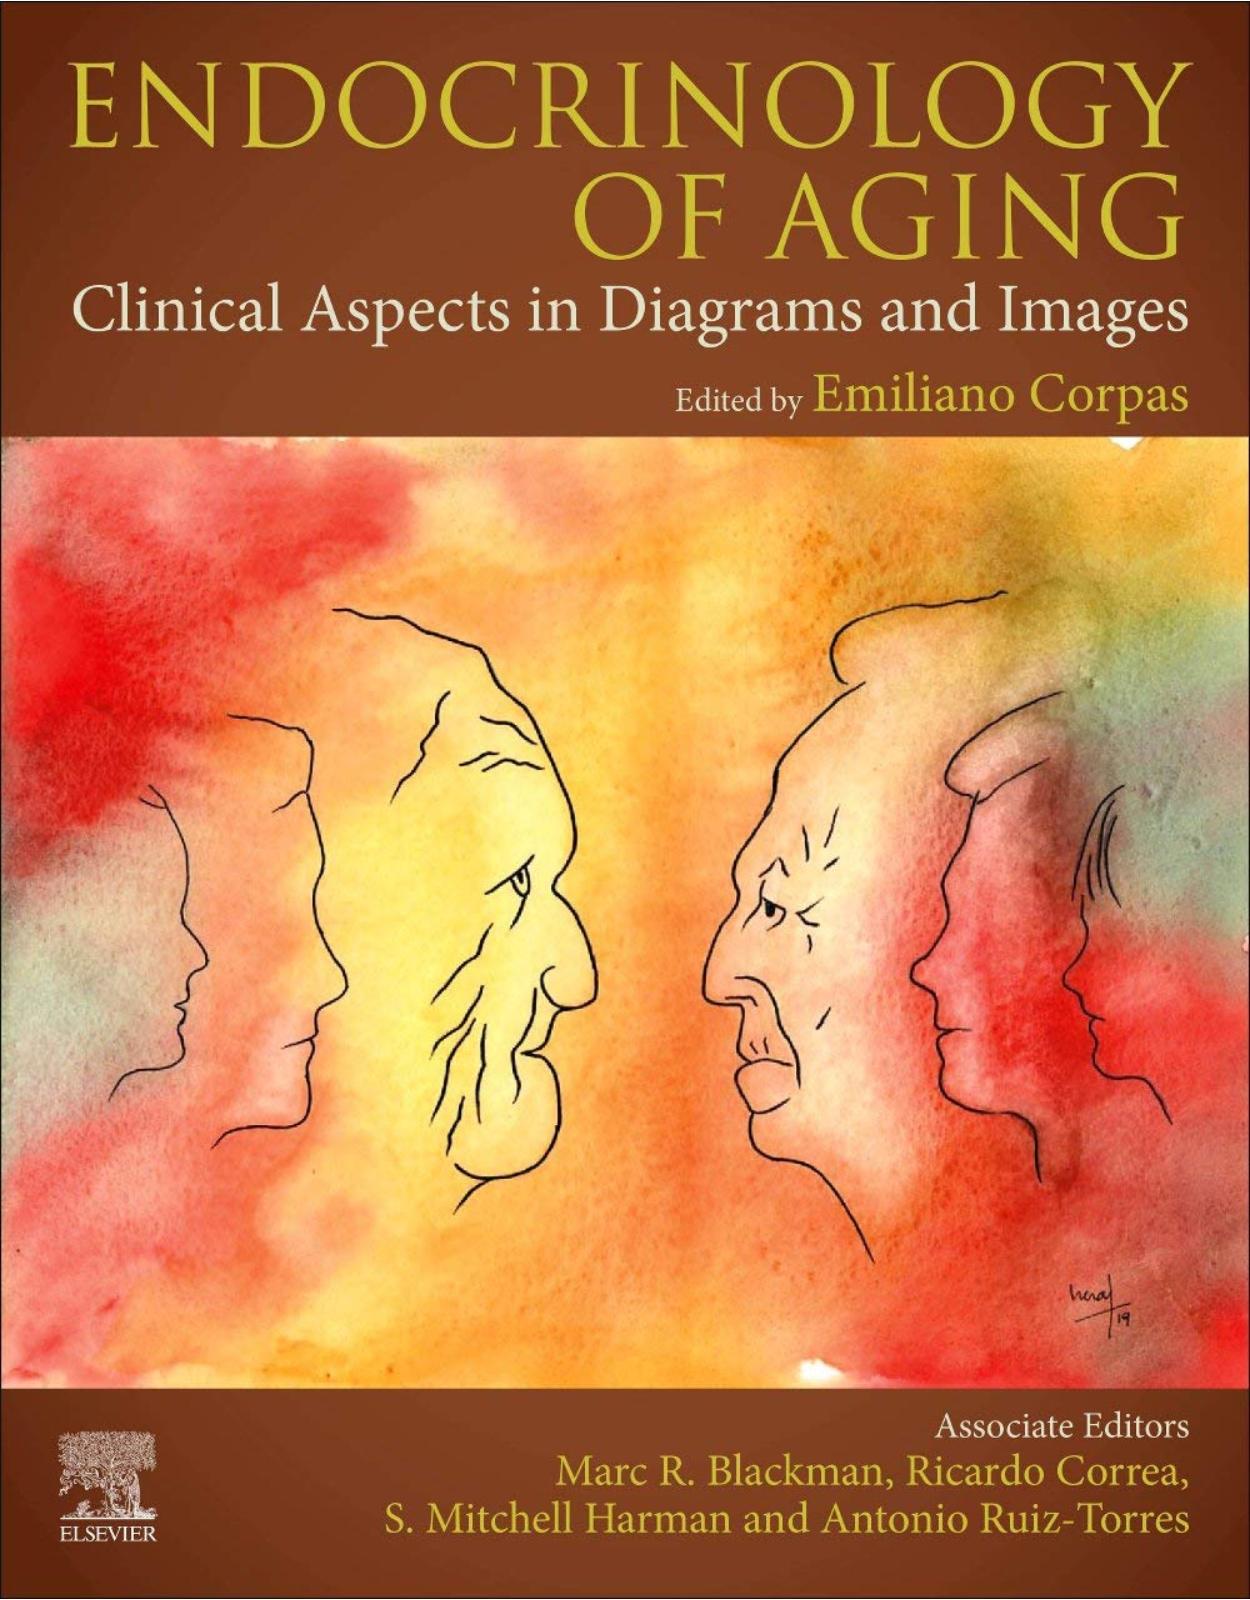 Endocrinology of Aging: Clinical Aspects in Diagrams and Images